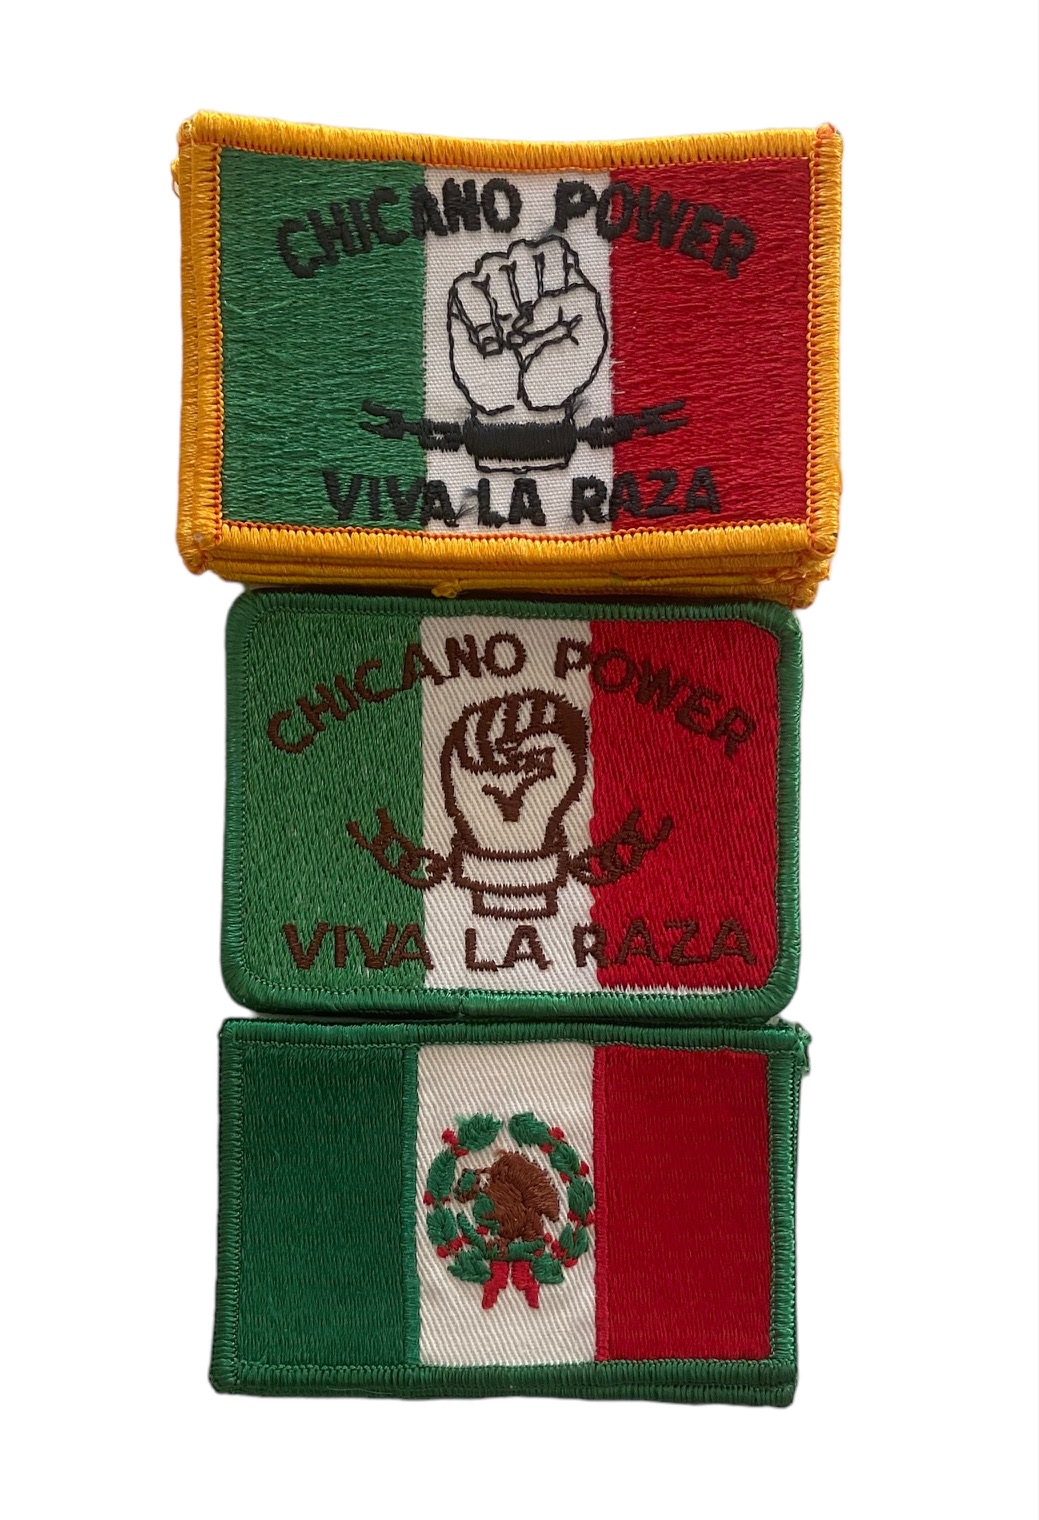 1970s Chicano Power Patches: Manuscript / Paper Collectible